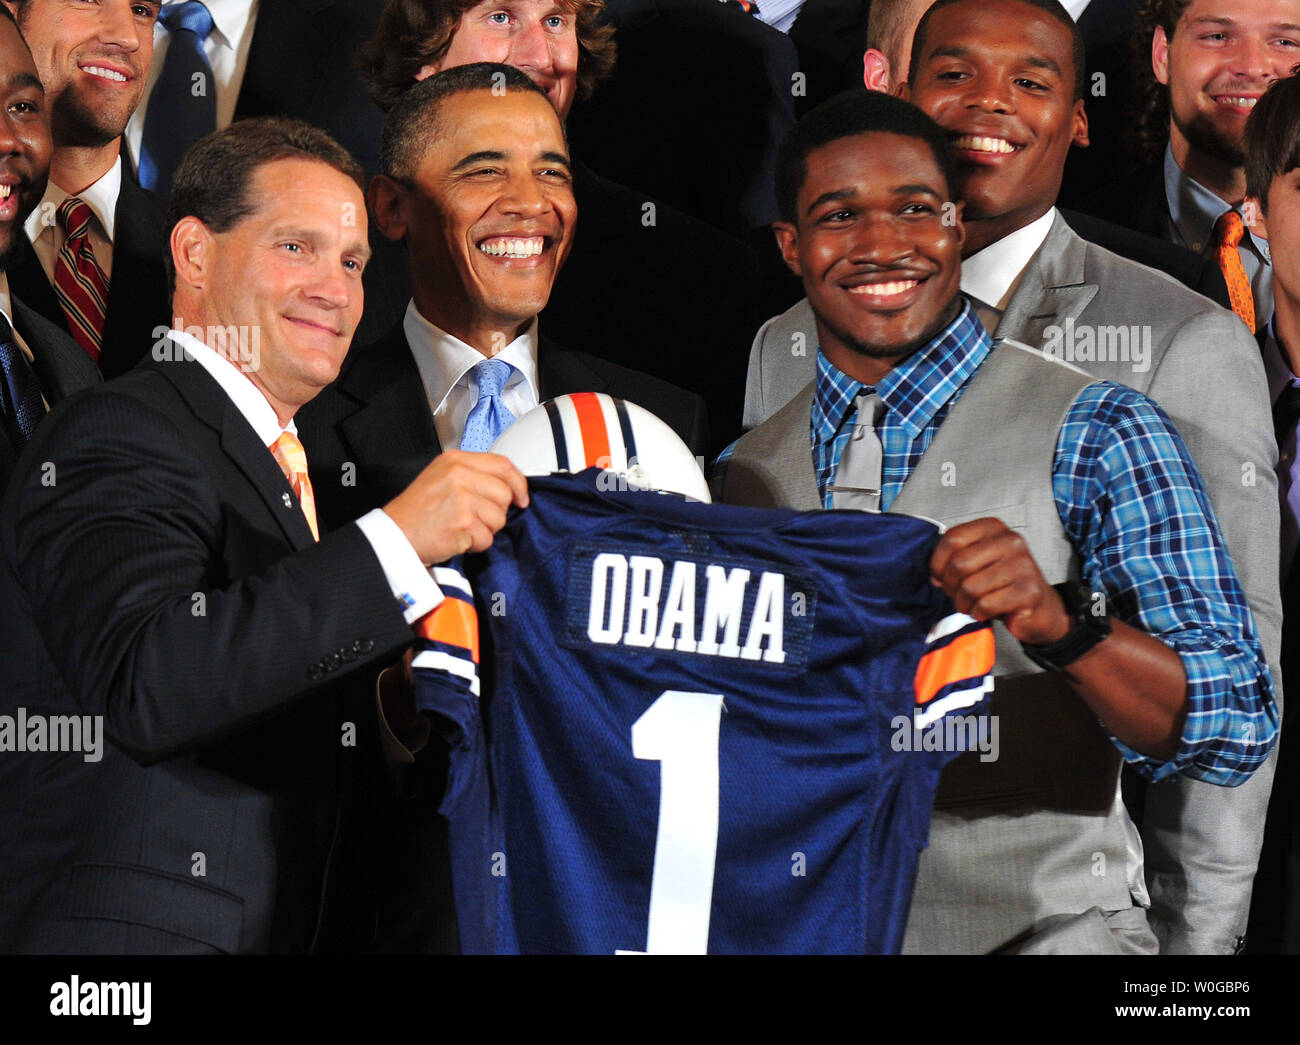 President Barack Obama is presented an Auburn University football jersey by Auburn  coach Gene Chizik and wide receiver Kodi Burns during a ceremony honoring  the 2010 NCAA Champion Auburn Tigers in the